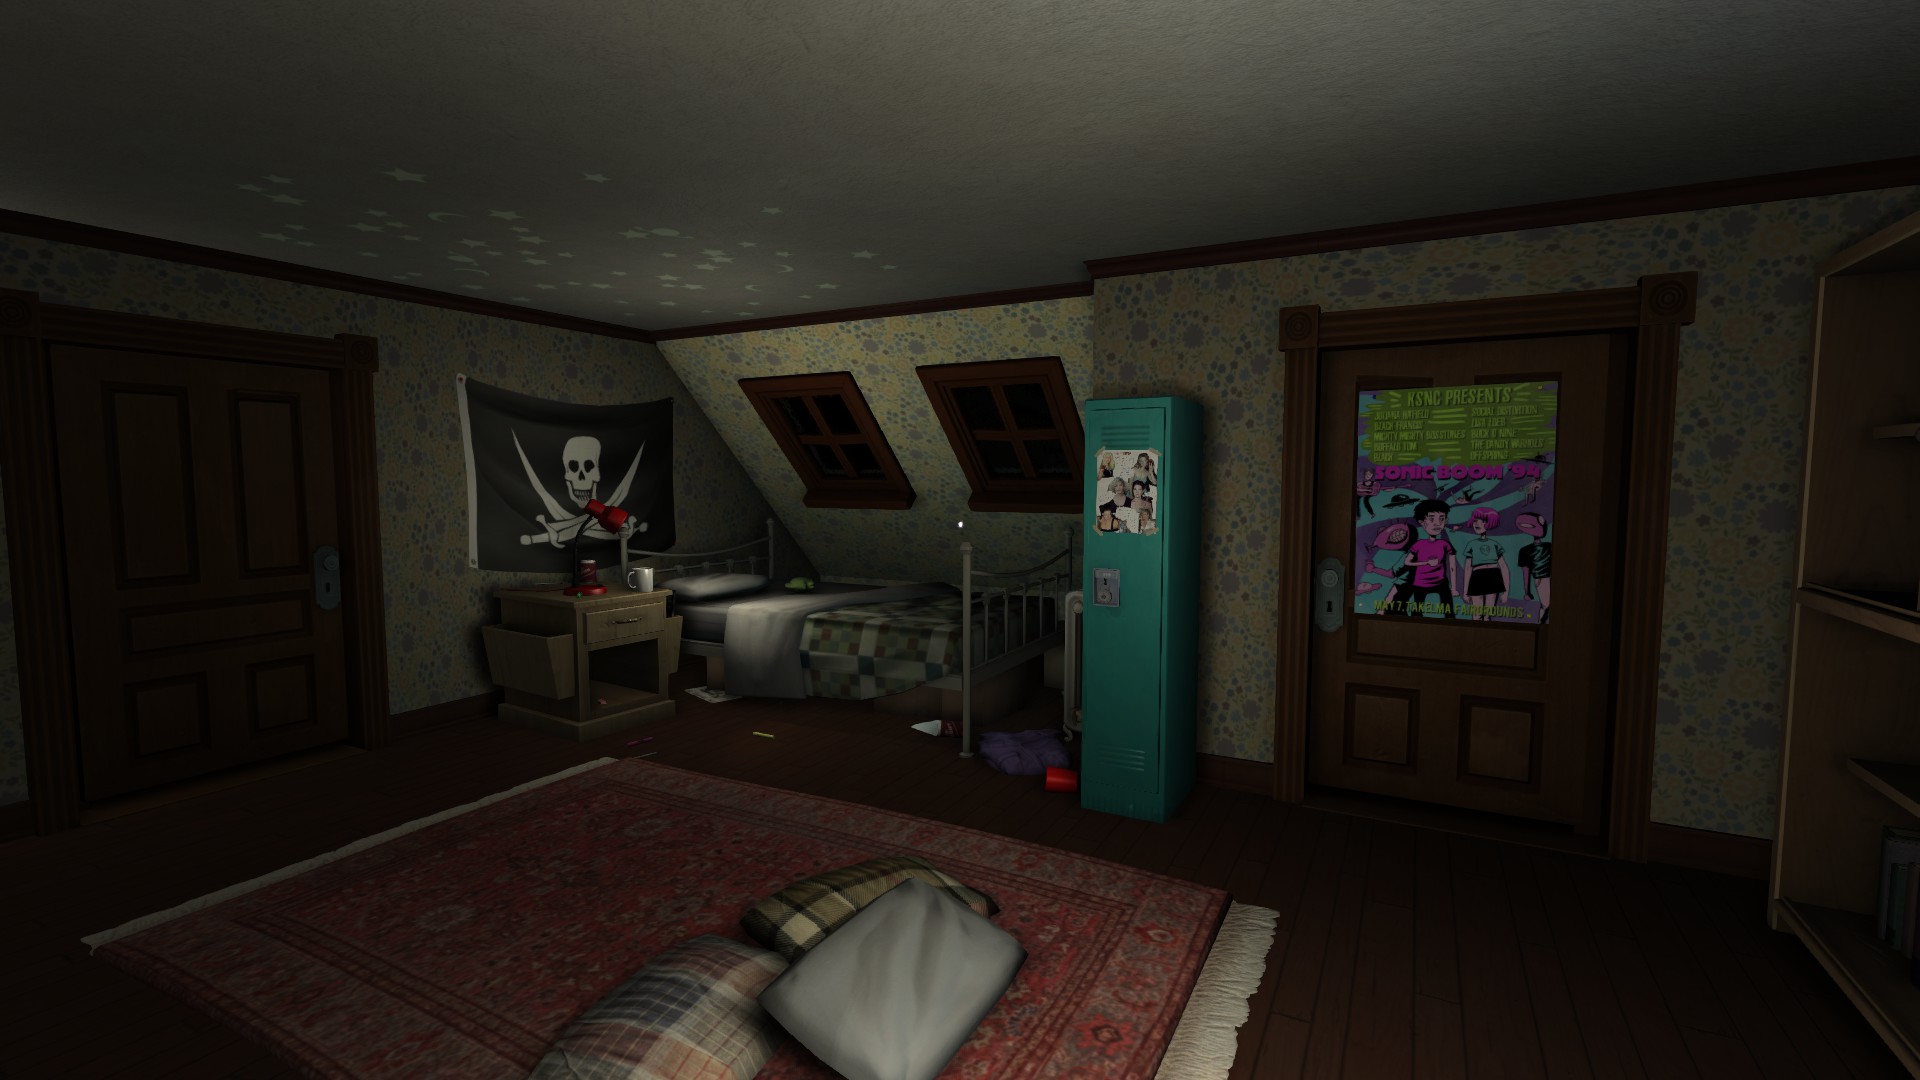 Go home игра. Gone Home игра ps4. Игра going Home. Gone Home геймплей.